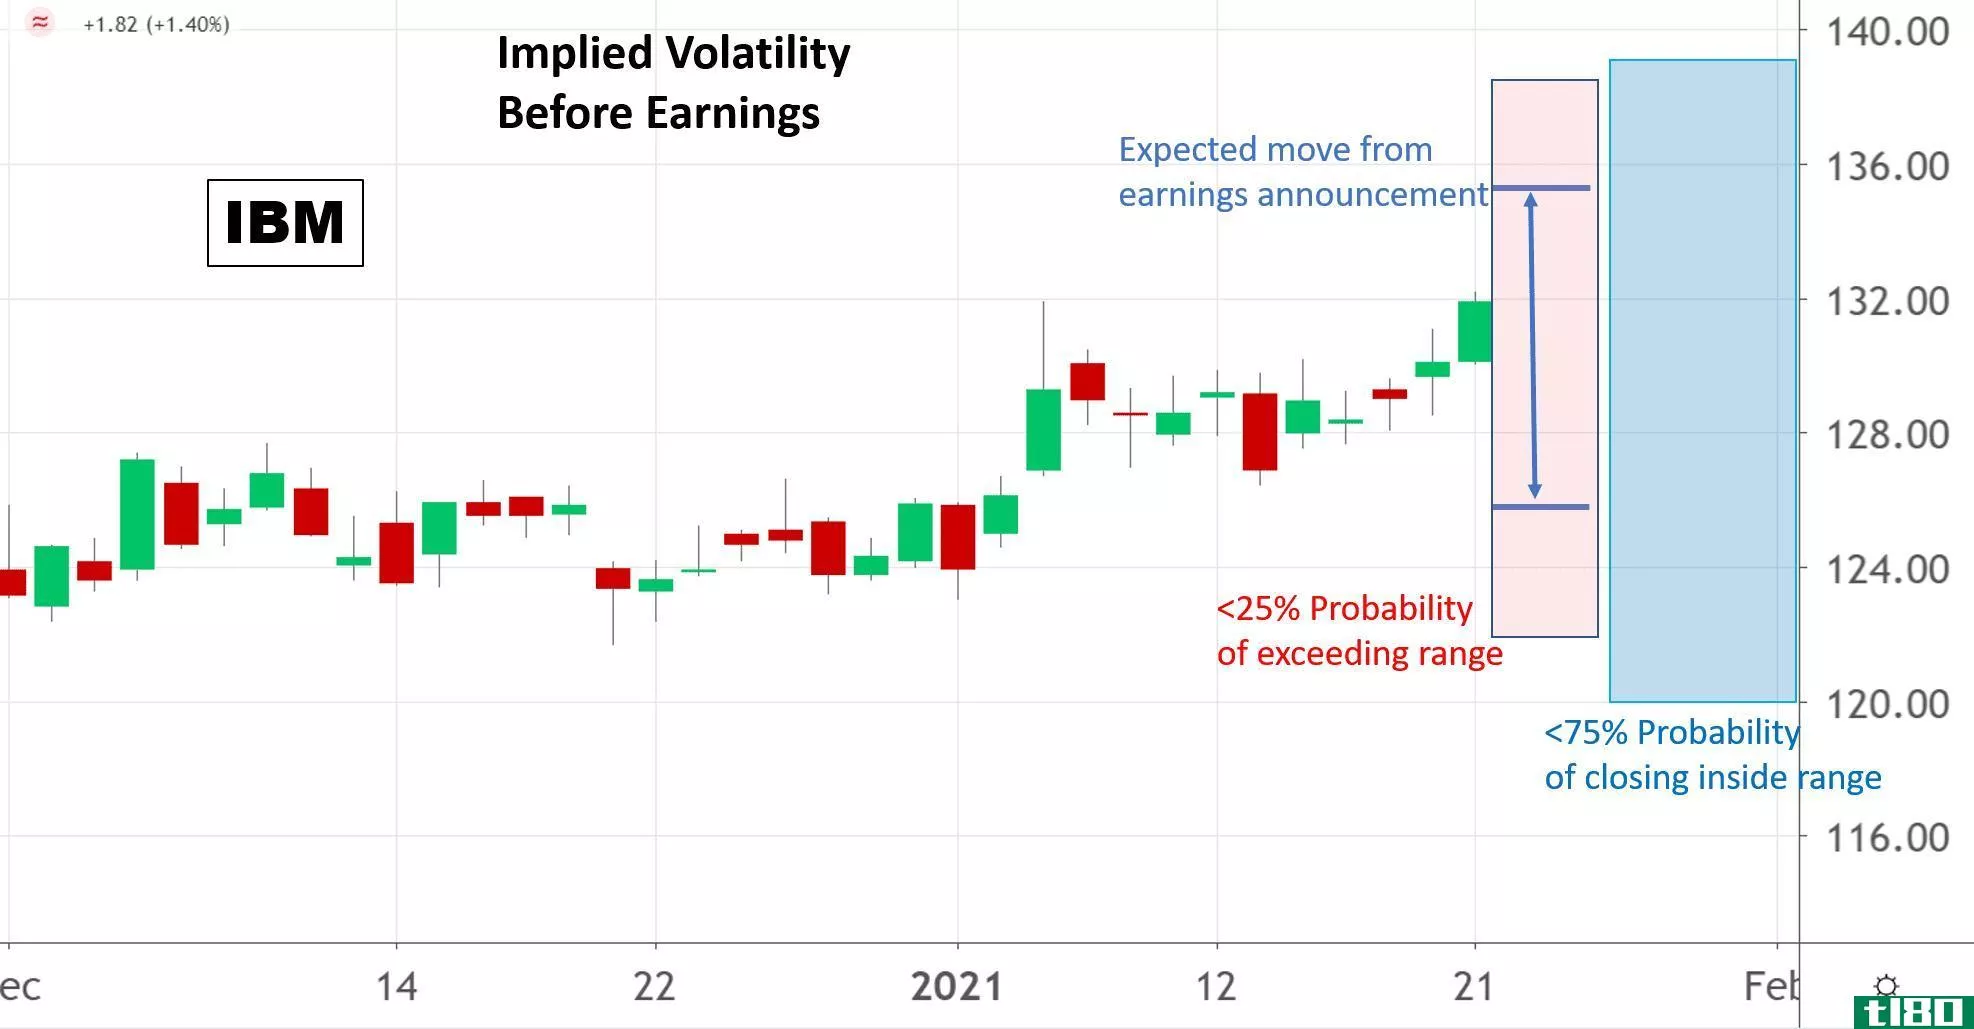 Chart showing IBM implied volatility before earnings